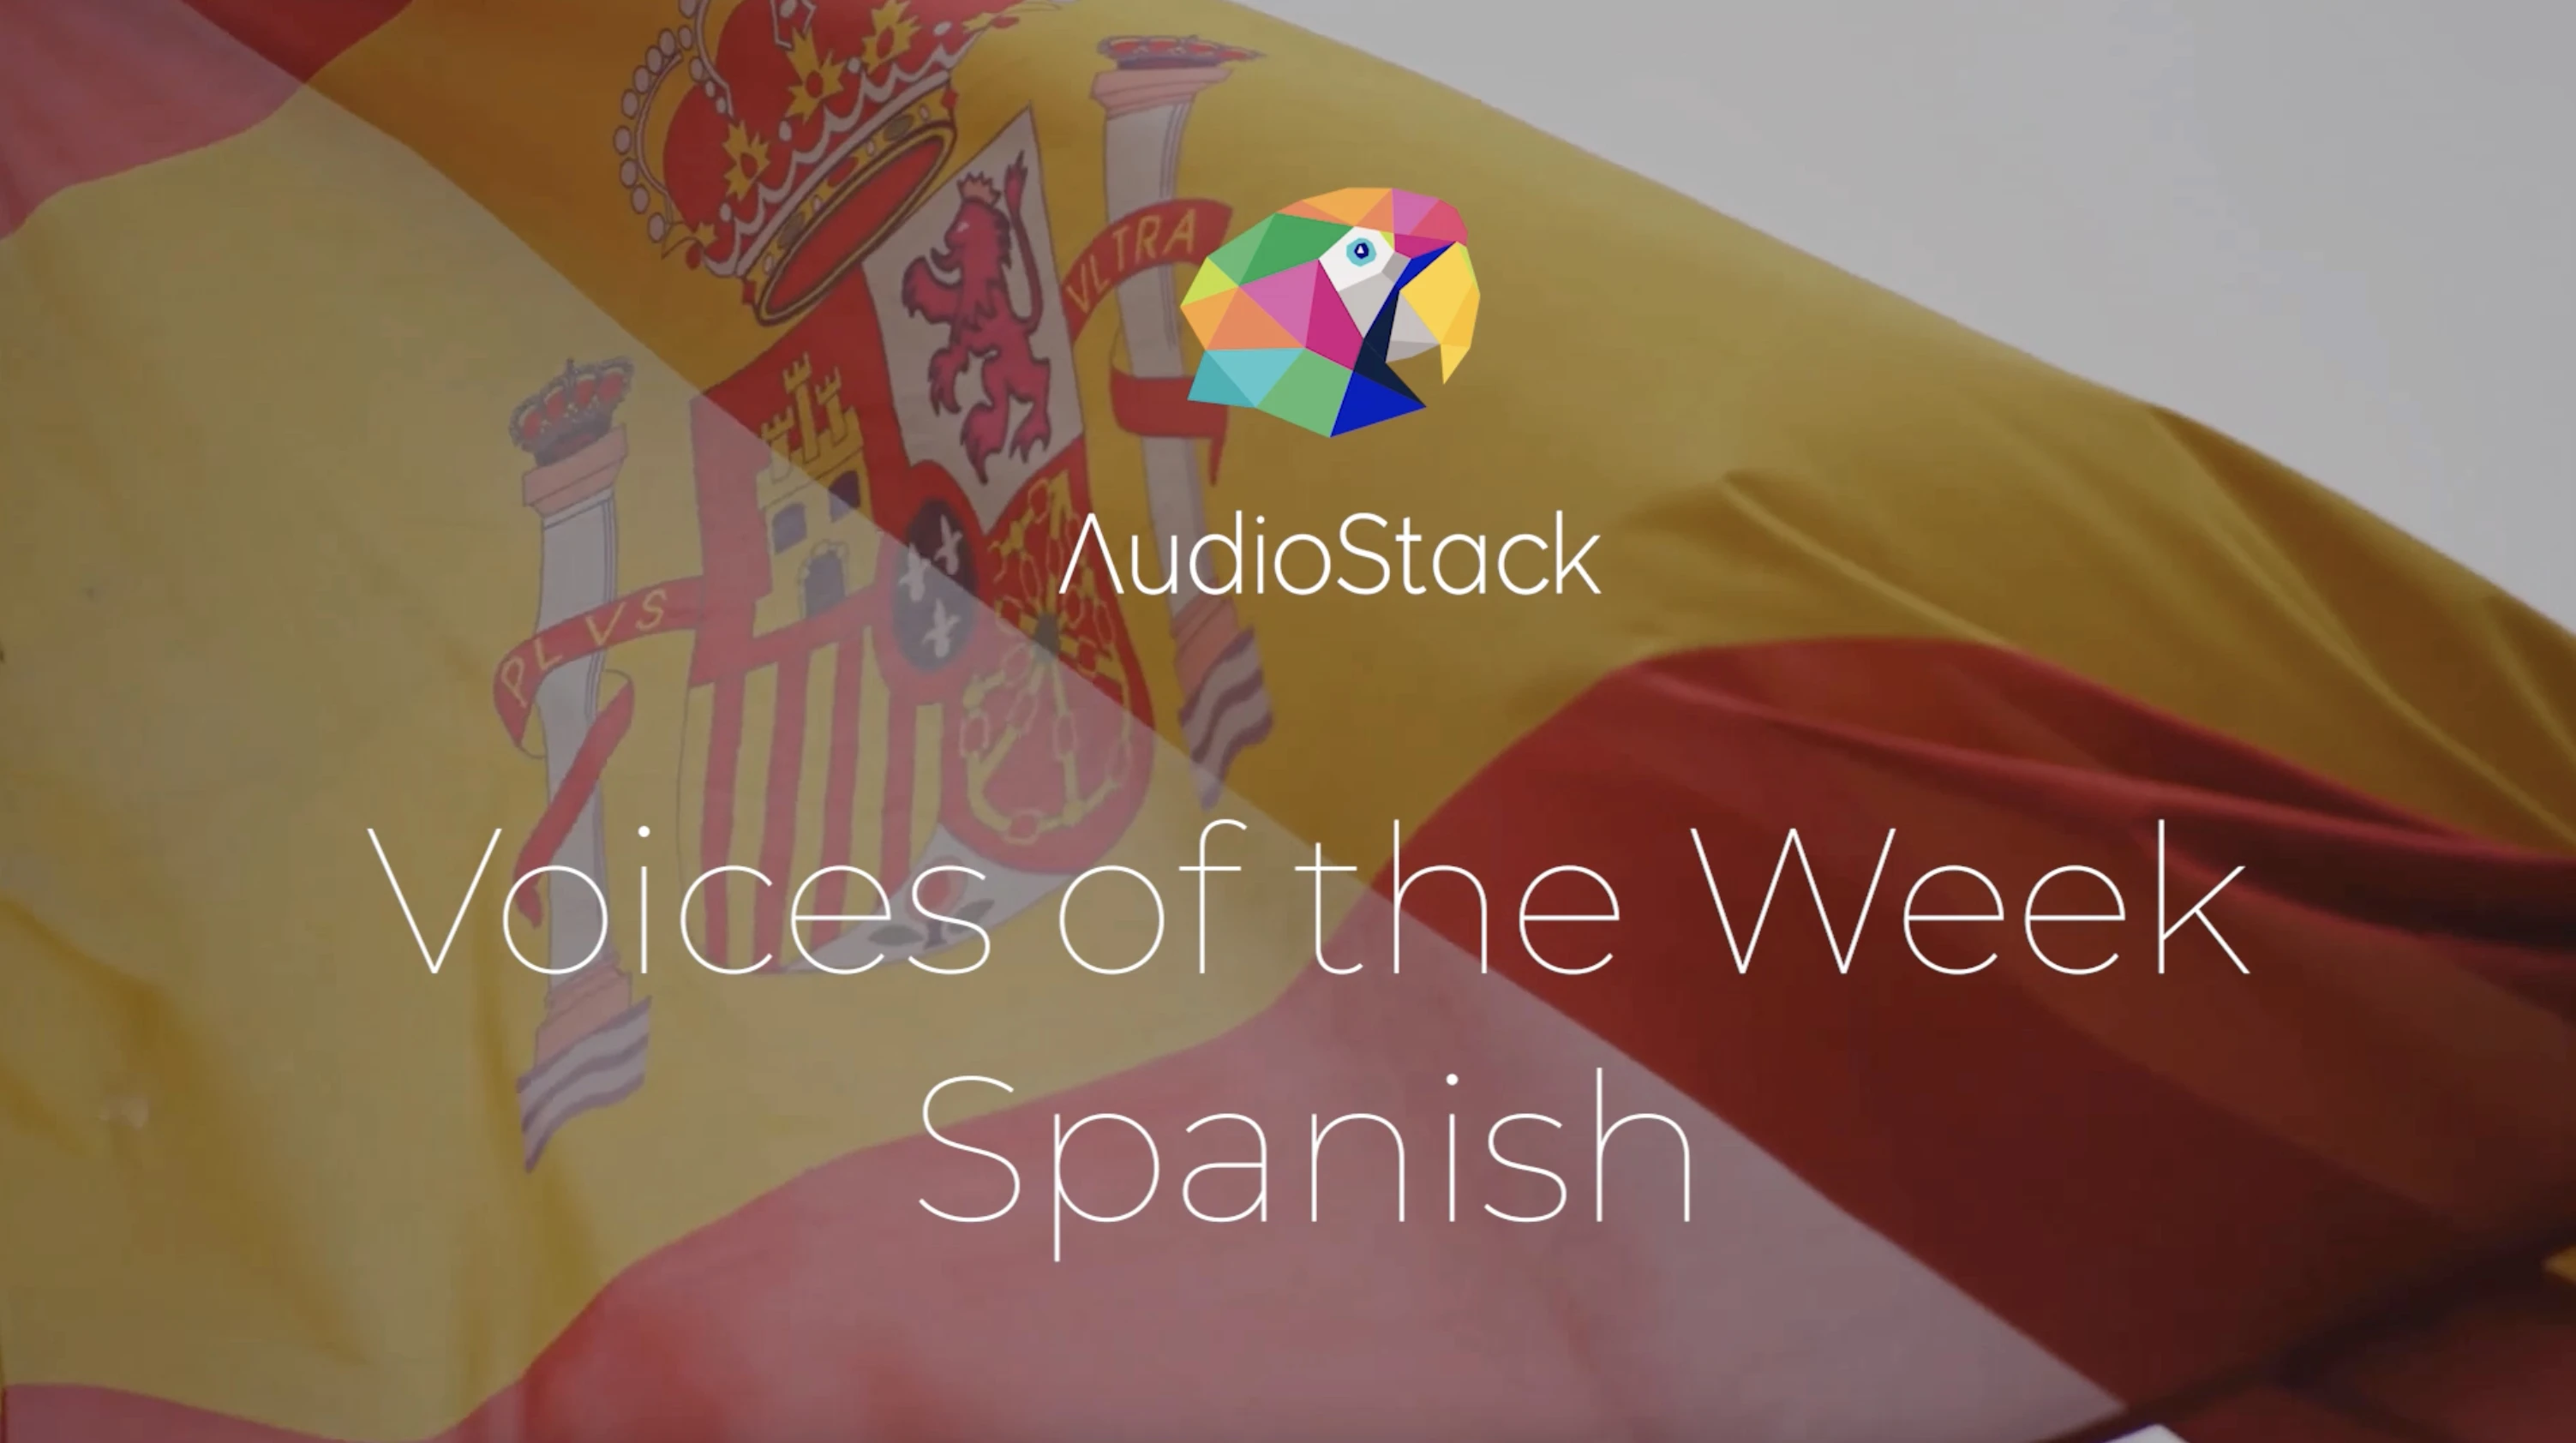 'AI Voice of the Week' is AudioStack's weekly highlight of our favorite TTS voices